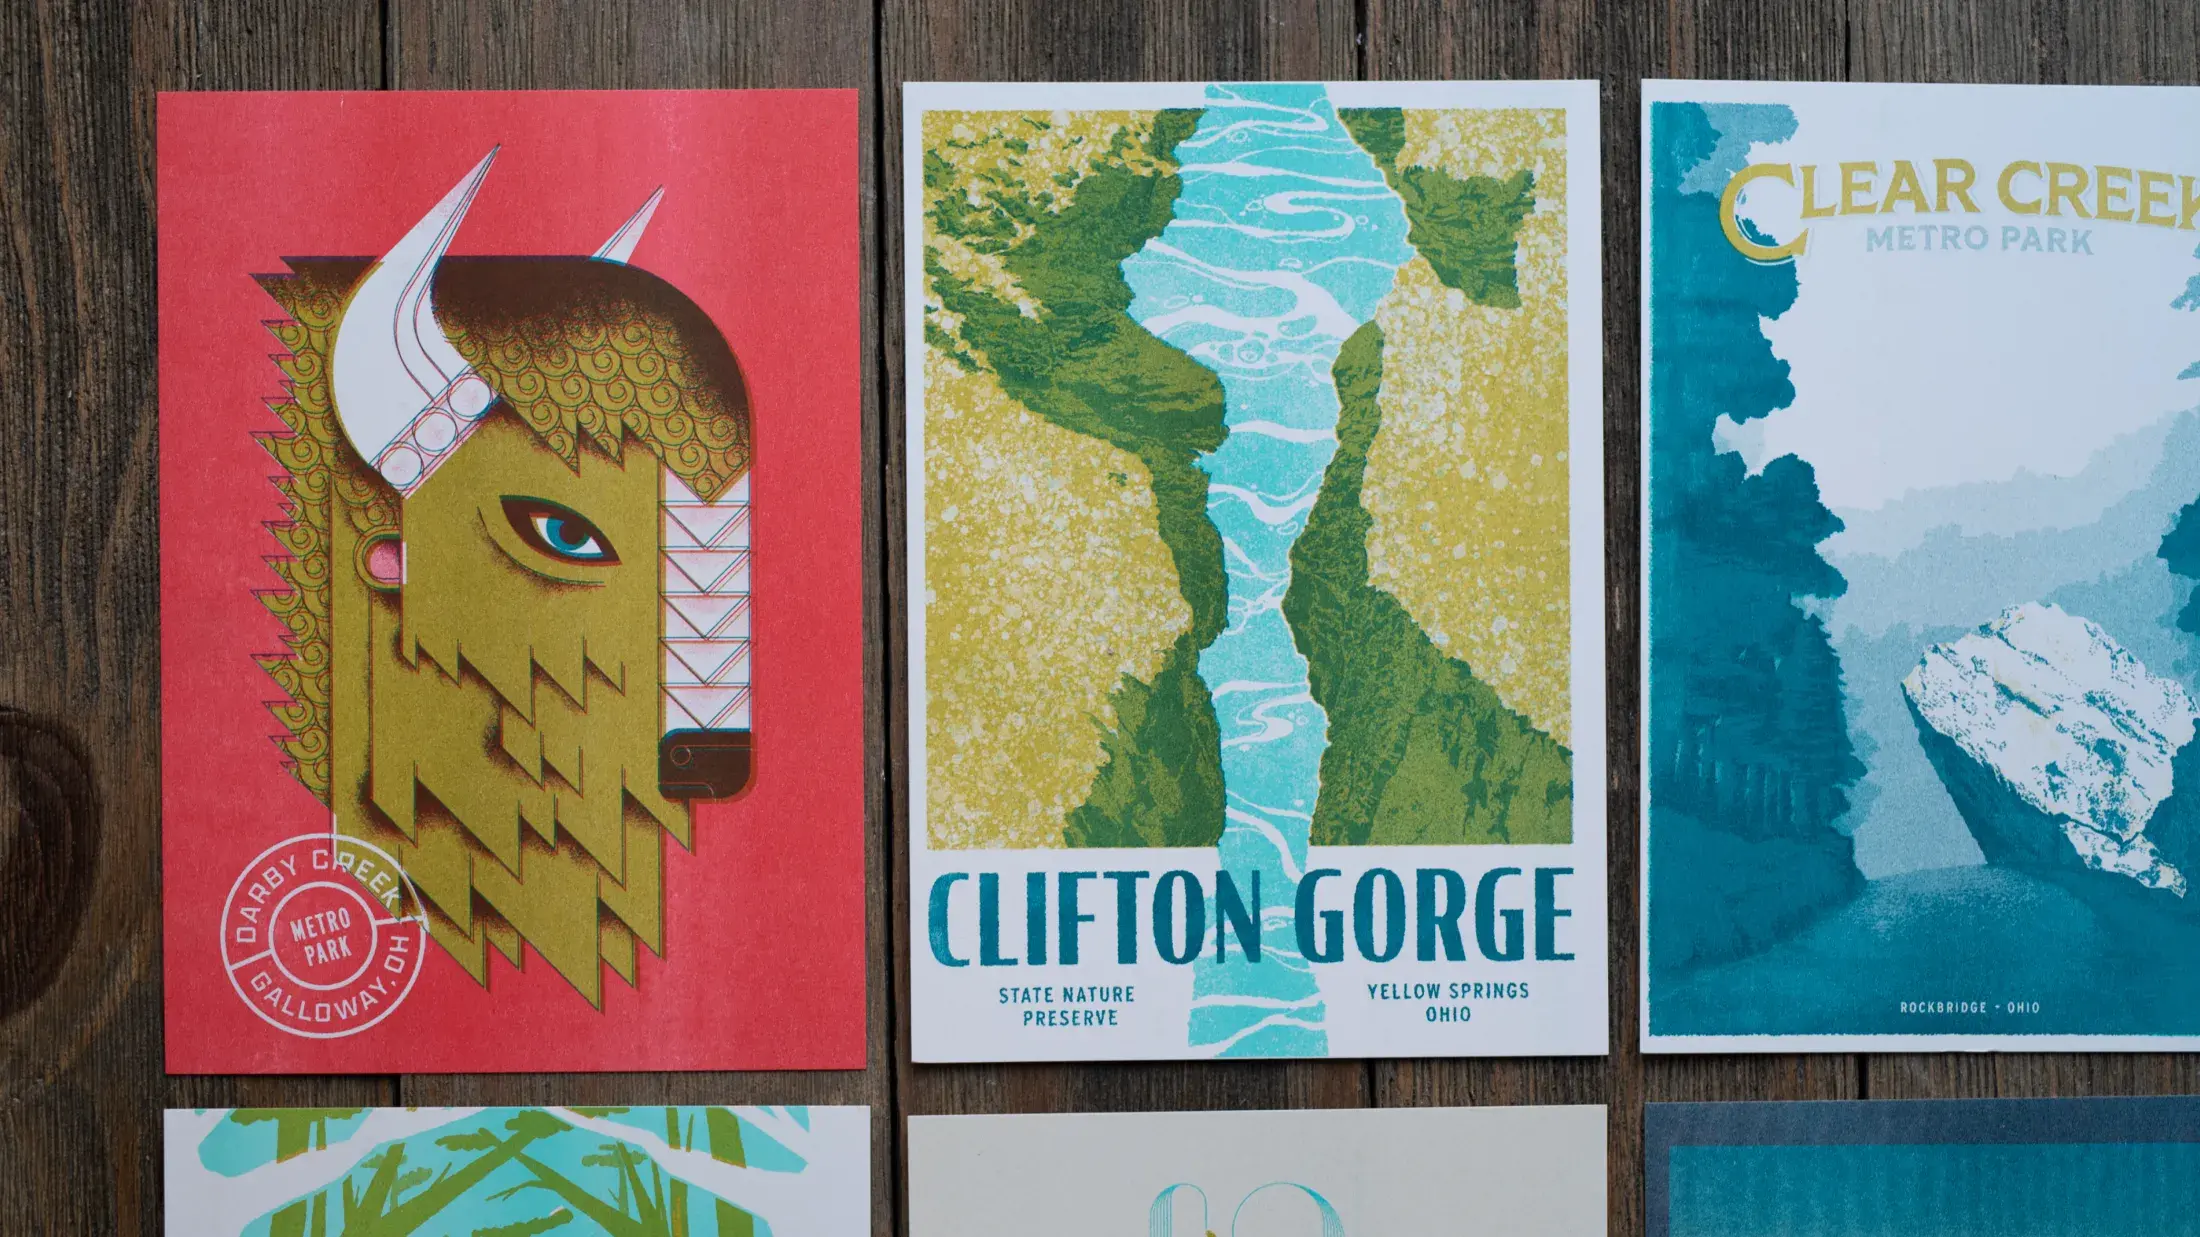 Postcards for Darby Creek, Clifton Gorge and Clear Creek in a grid with other cards surrounding